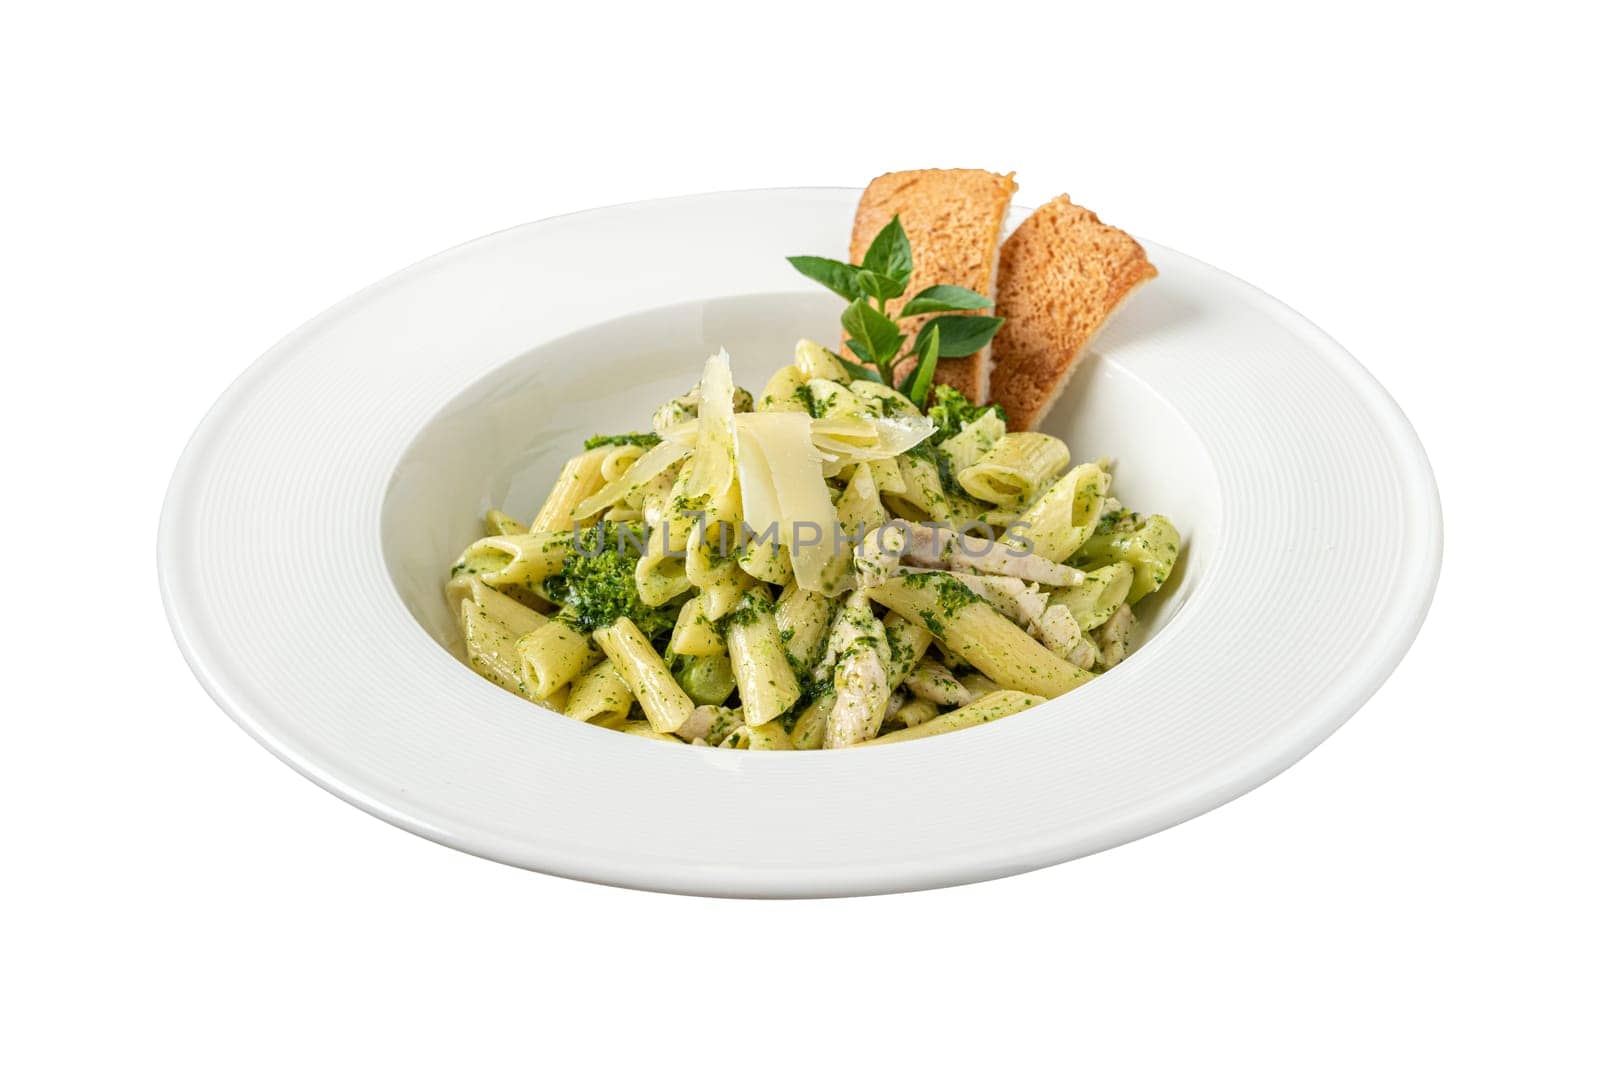 Penne pasta with pesto sauce, zucchini, green peas and basil.